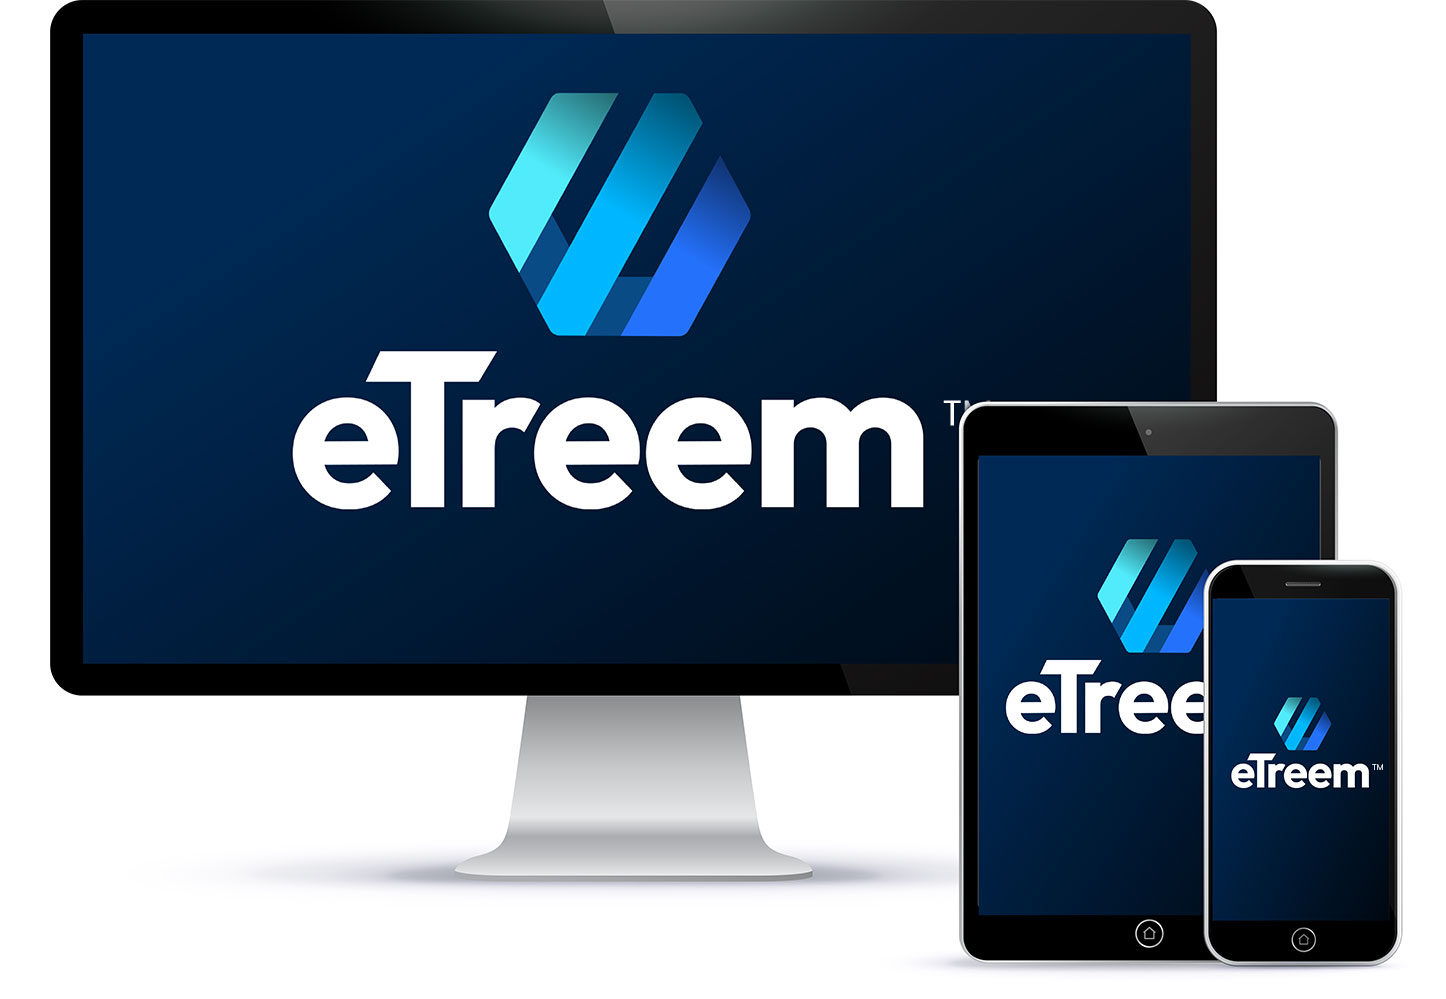 eTreem on different devices